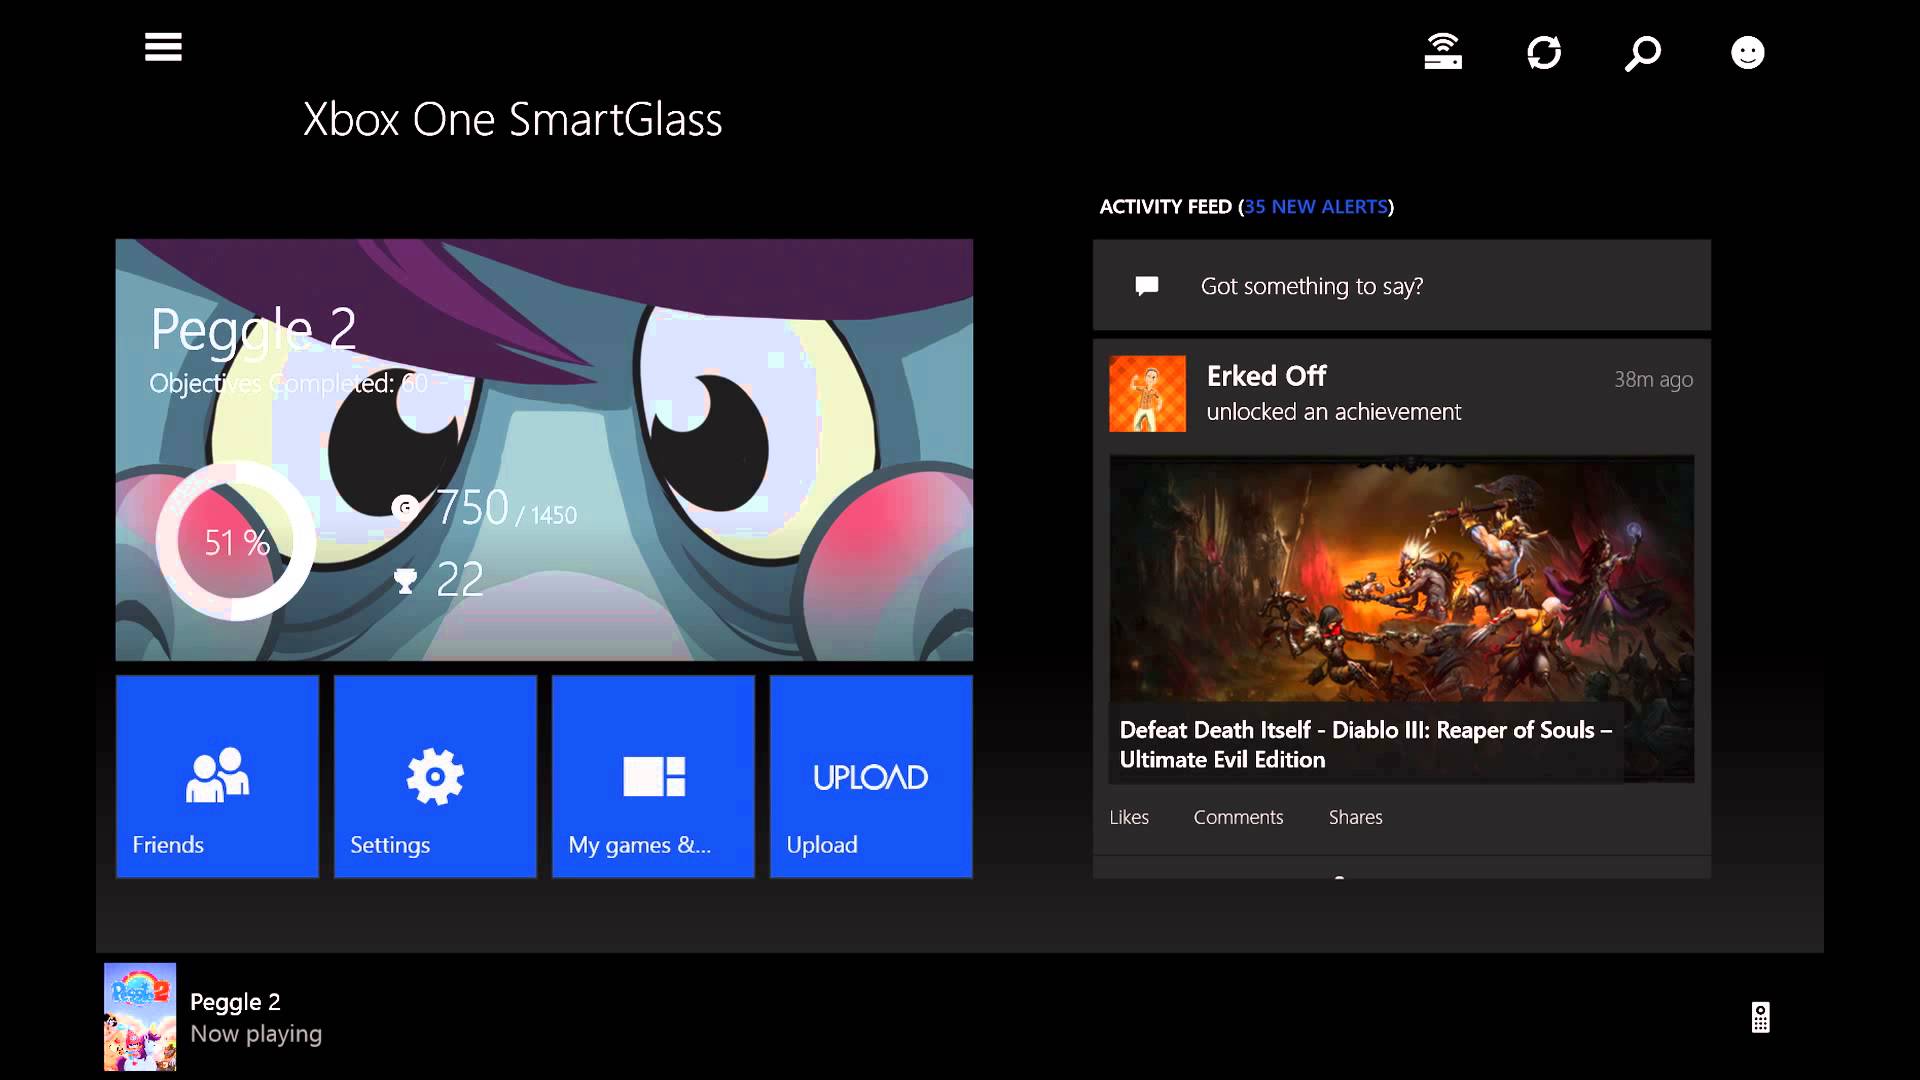 Video For Starting Today, New Media Player App, New SmartGlass Features, and More Included in Xbox One Update